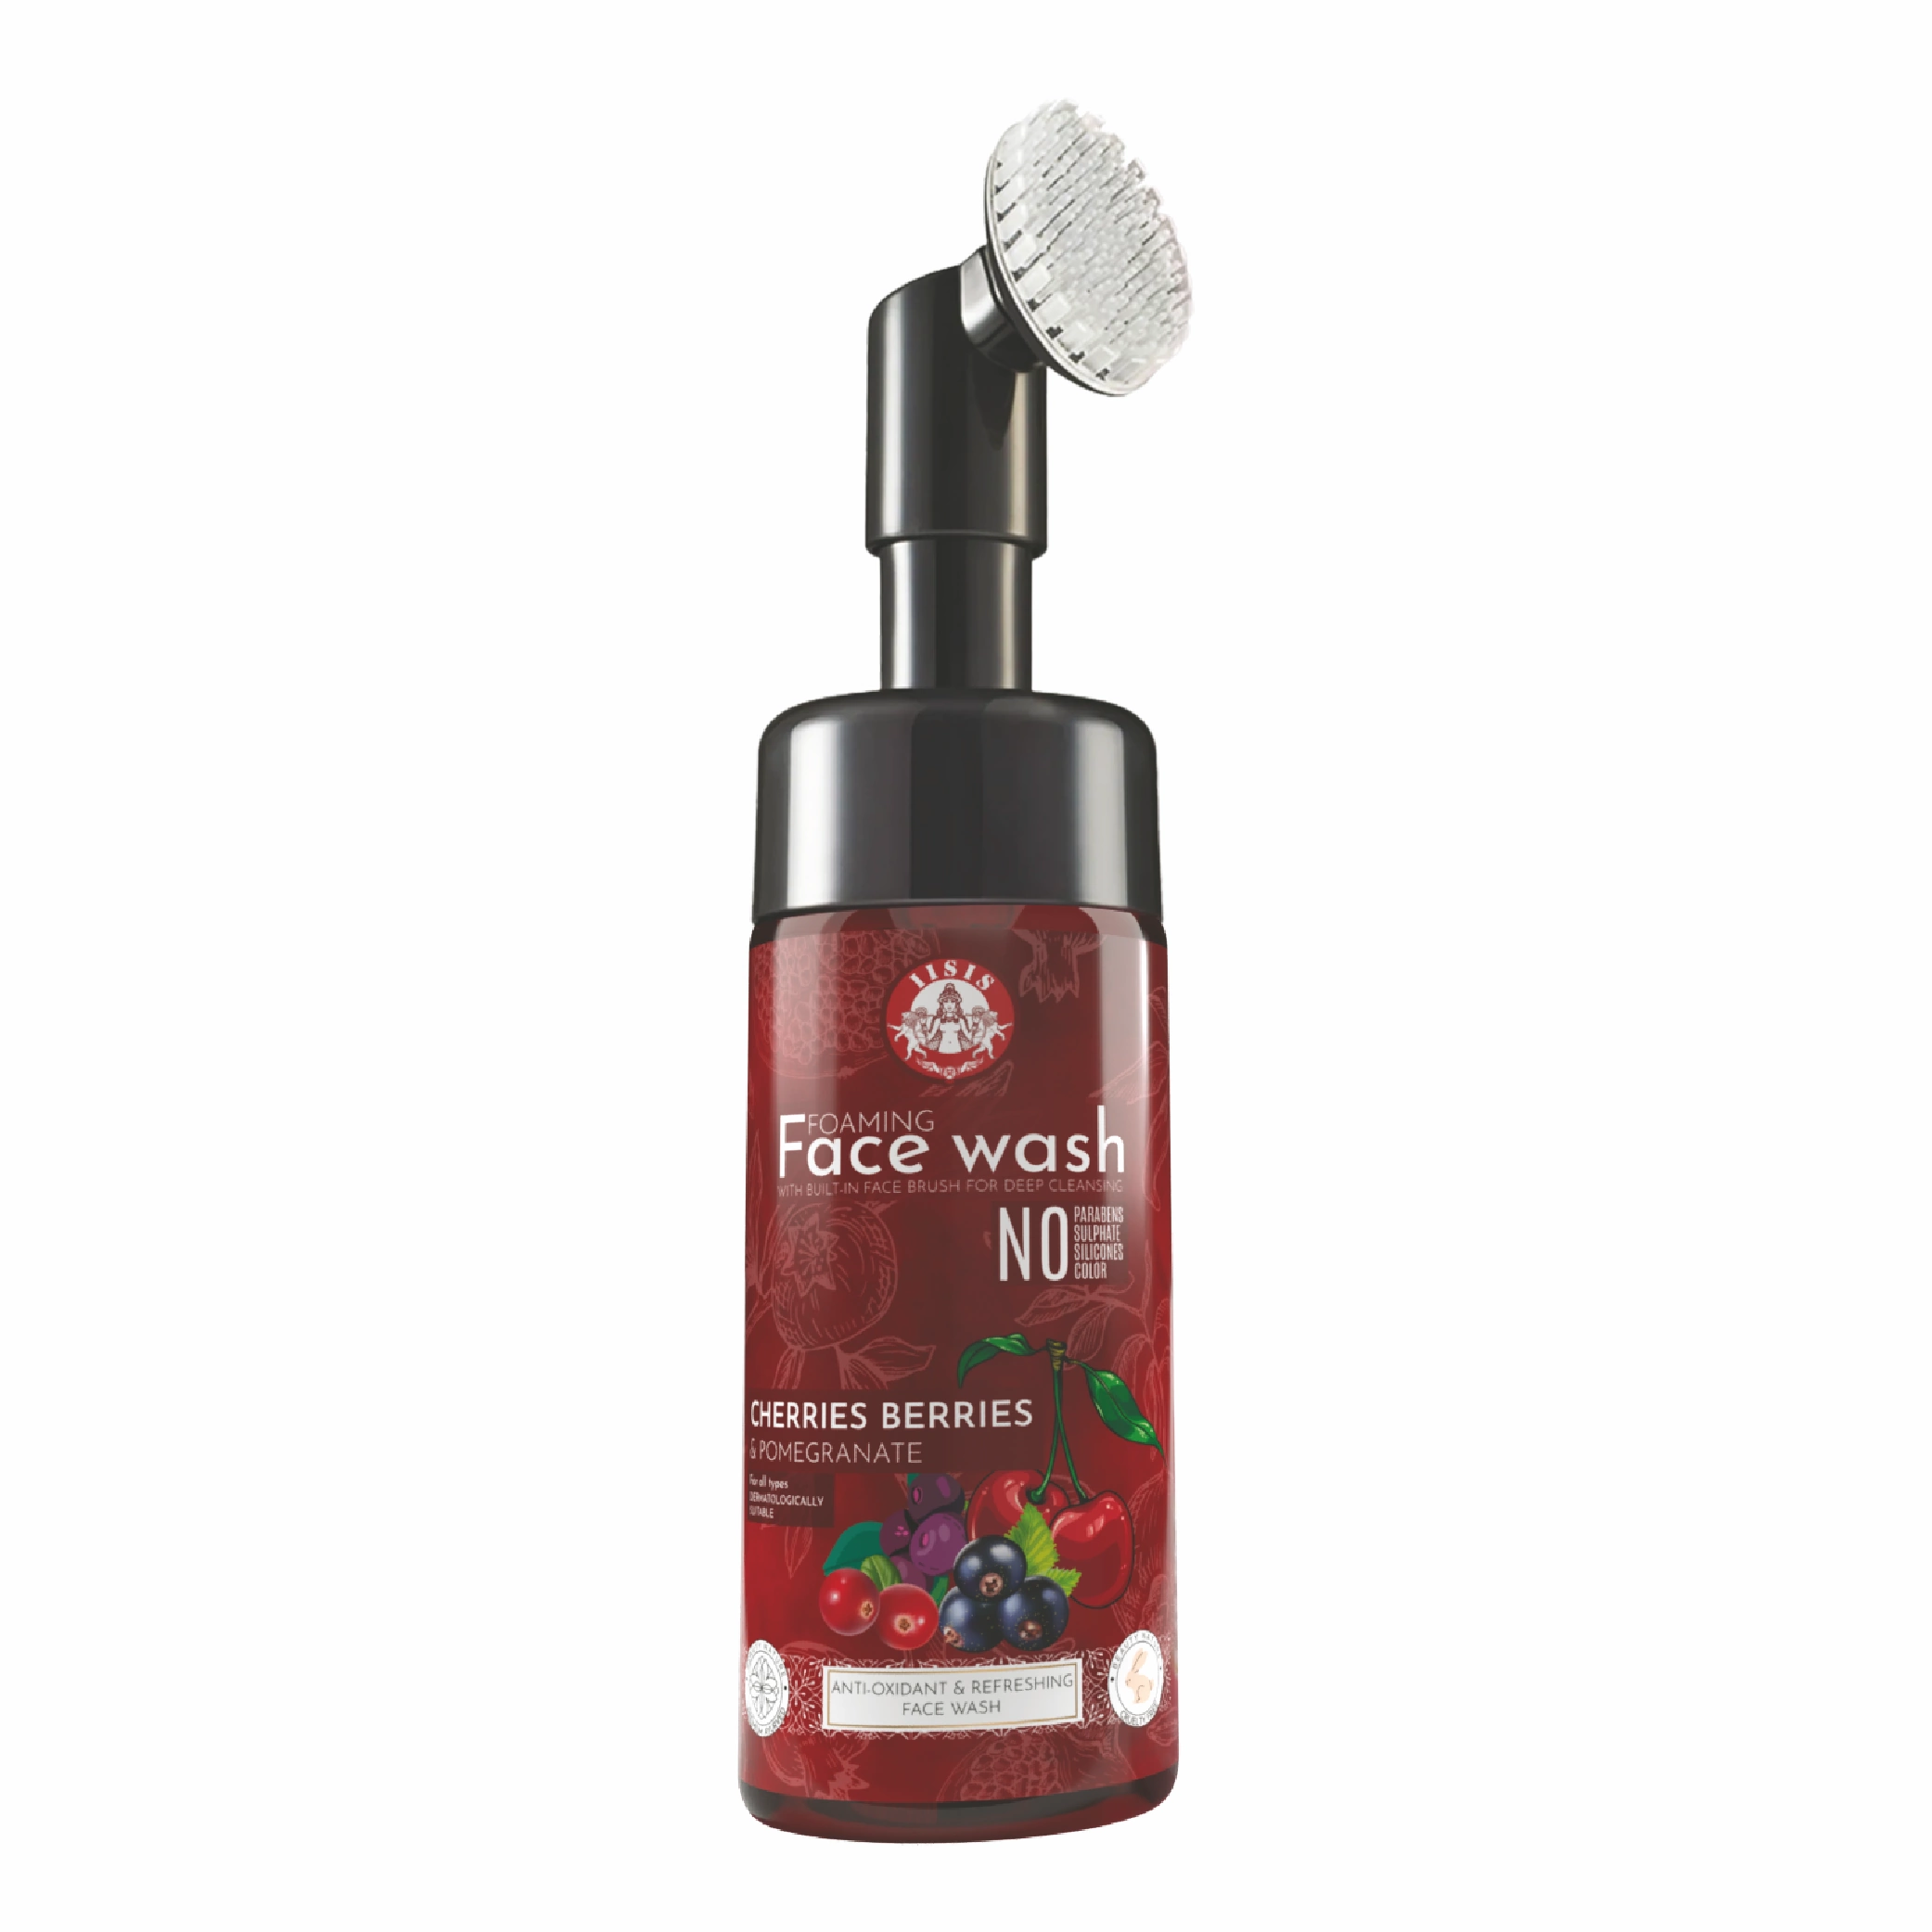 SCBV B2B Cherries Berries & Pomegranate Foaming Face Wash With Built-In Face Brush (150ml)- 12 Pcs.